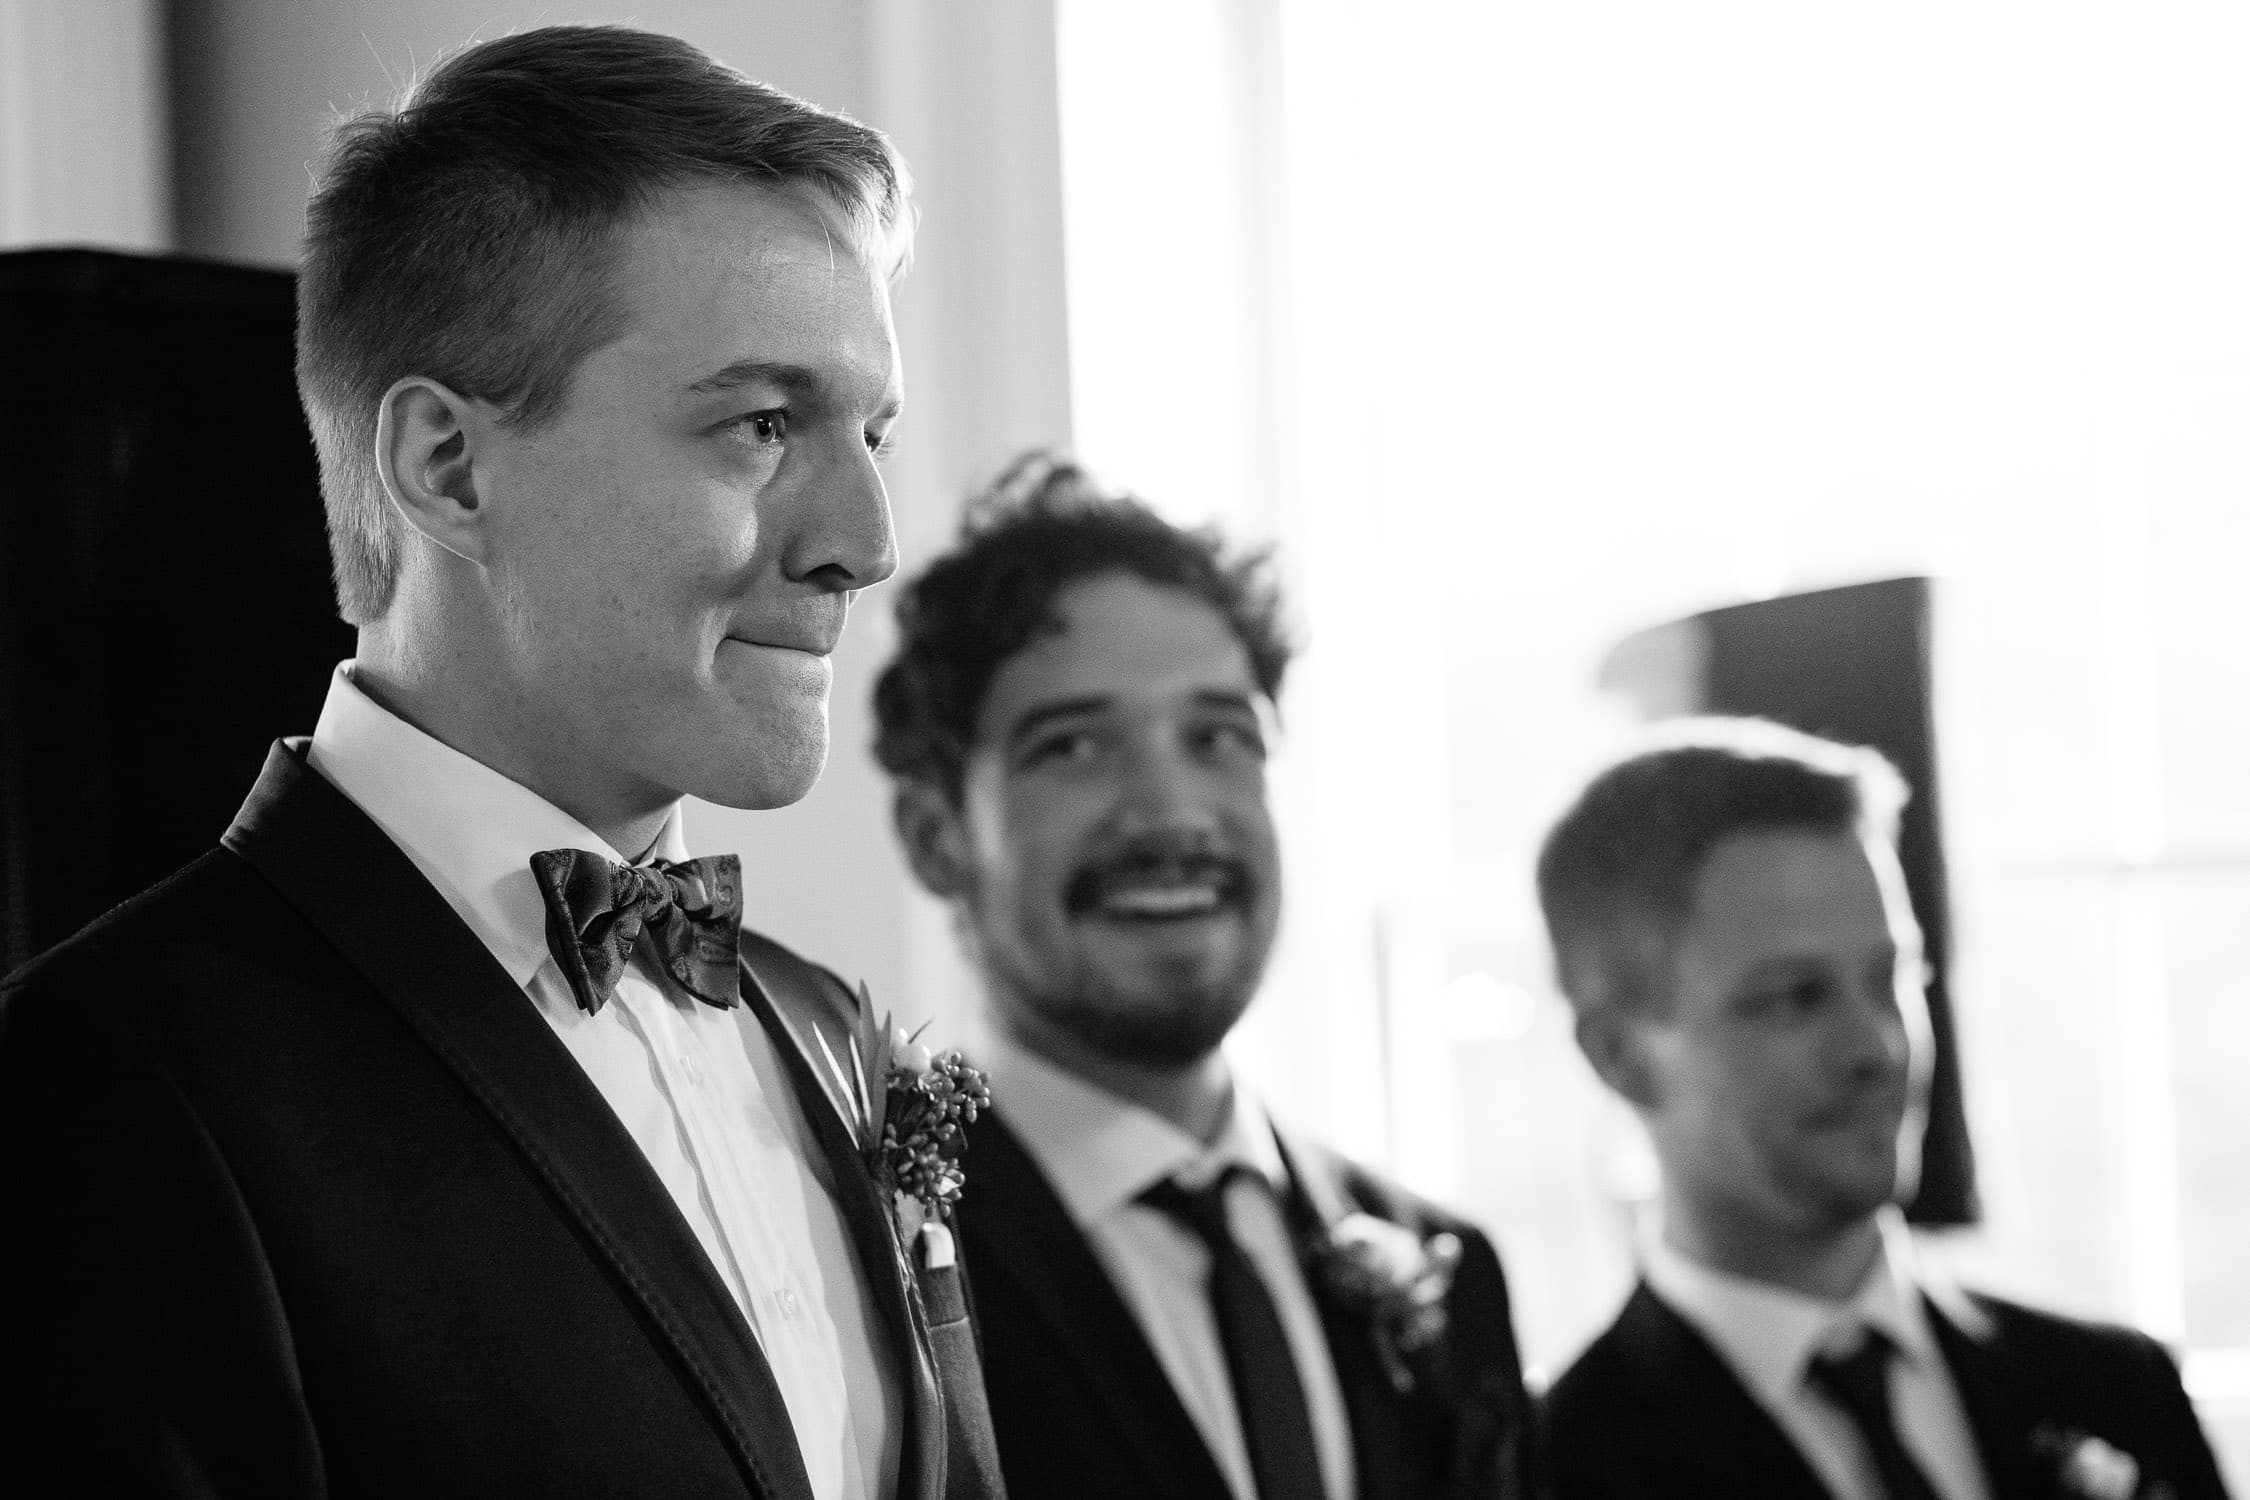 groom reacts to seeing bride walk down the aisle | indoor wedding ceremony at the Lyman Estate, Waltham, MA | emotional Boston wedding photographer | Kelly Benvenuto Photography